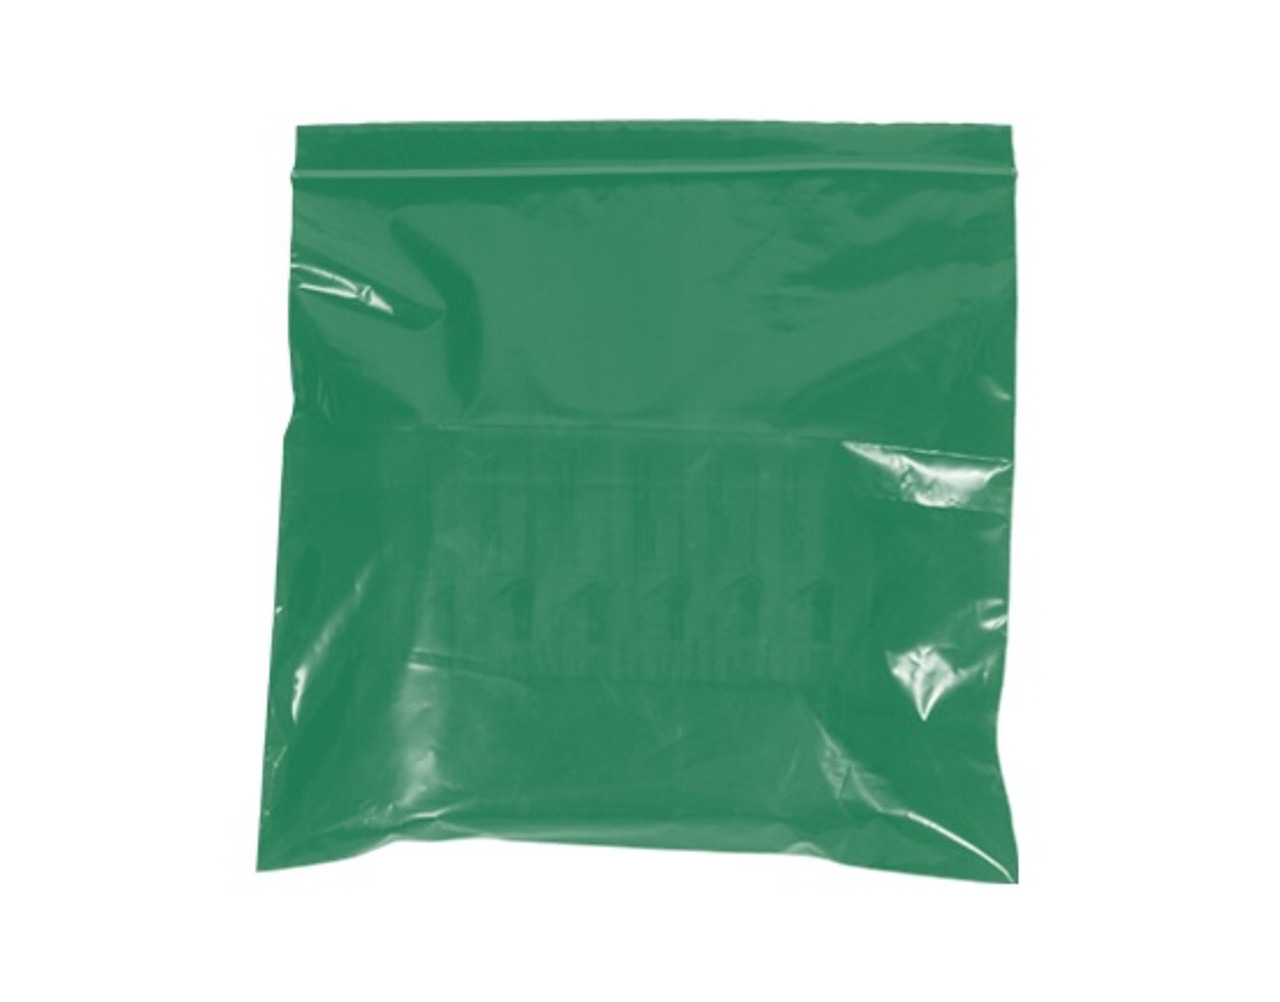 https://cdn11.bigcommerce.com/s-vxsr4nt/images/stencil/1280x1280/products/56781/29493/Green-Reclosable-Poly-Bags__10829.1496348937.jpg?c=2